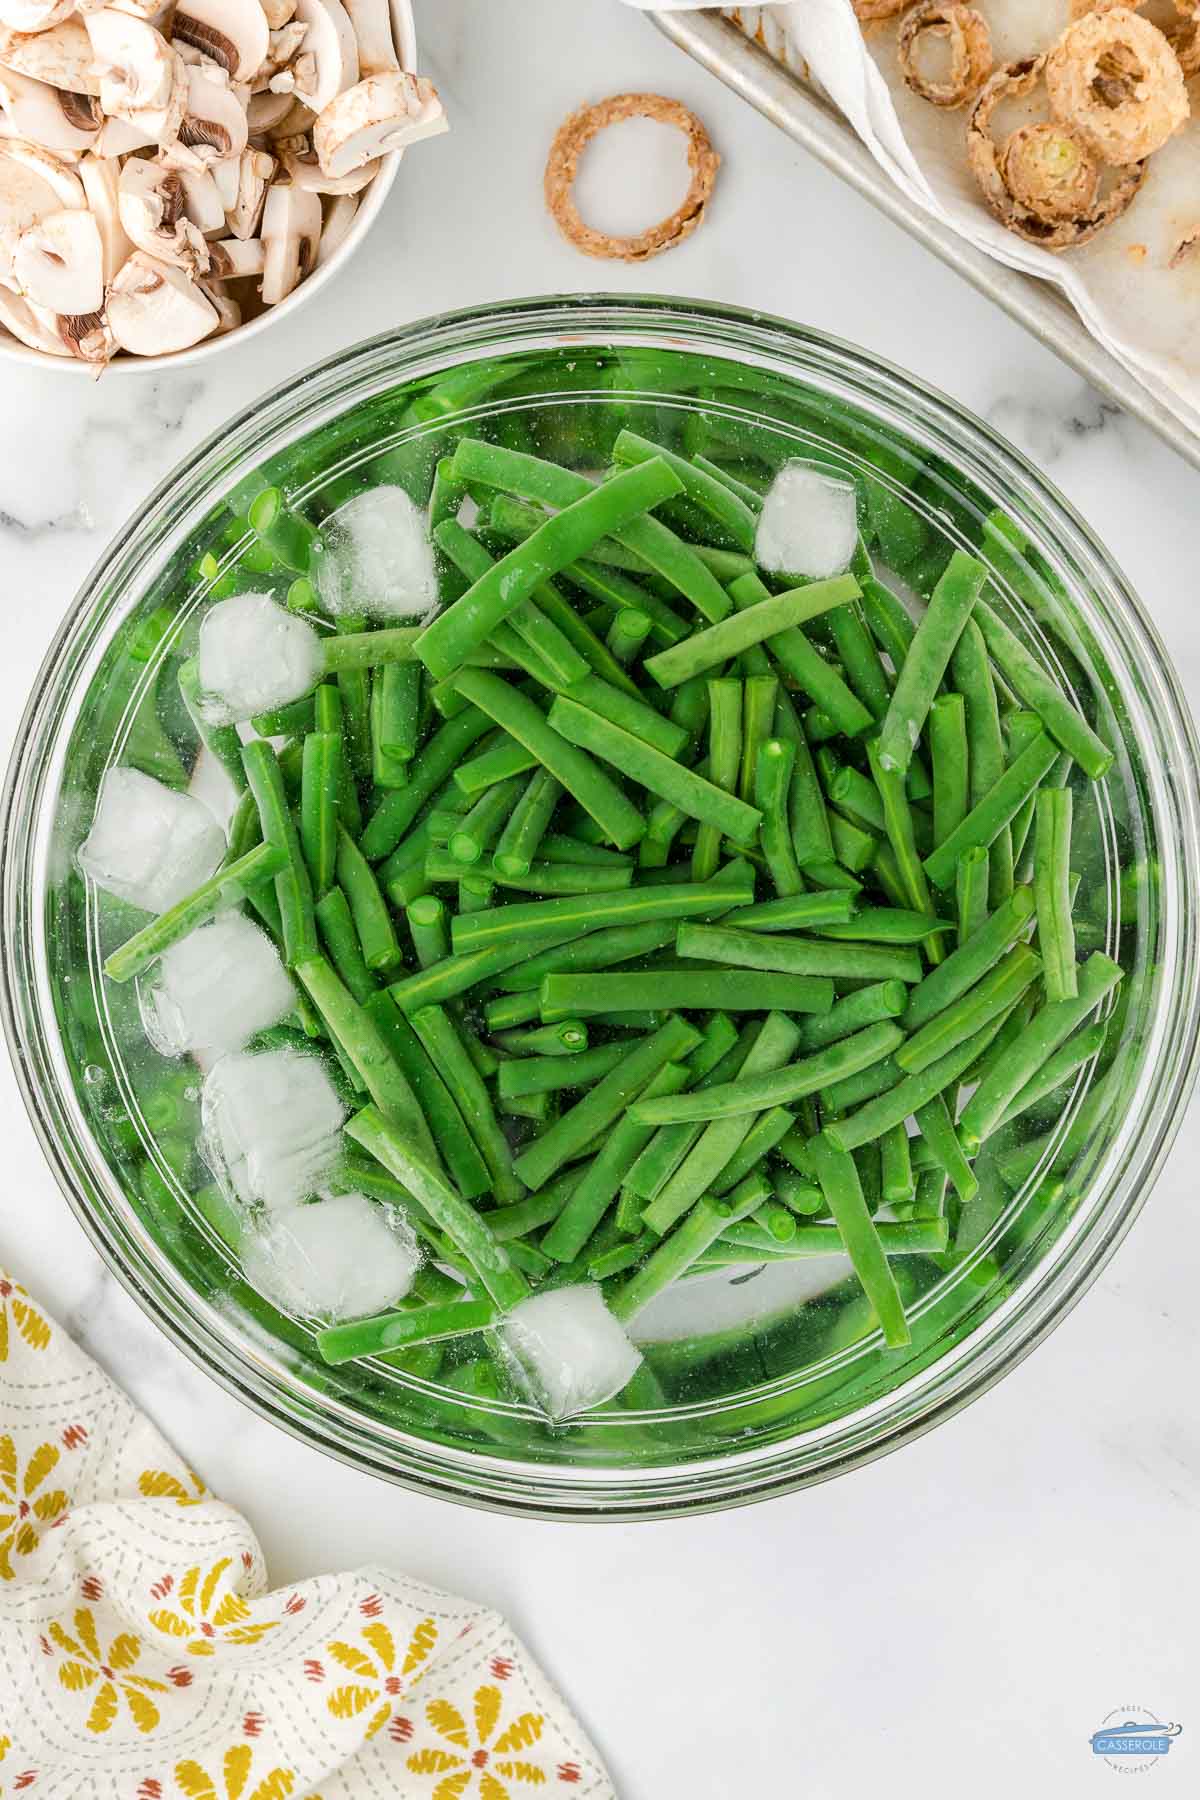 blanched green beans in an ice bath